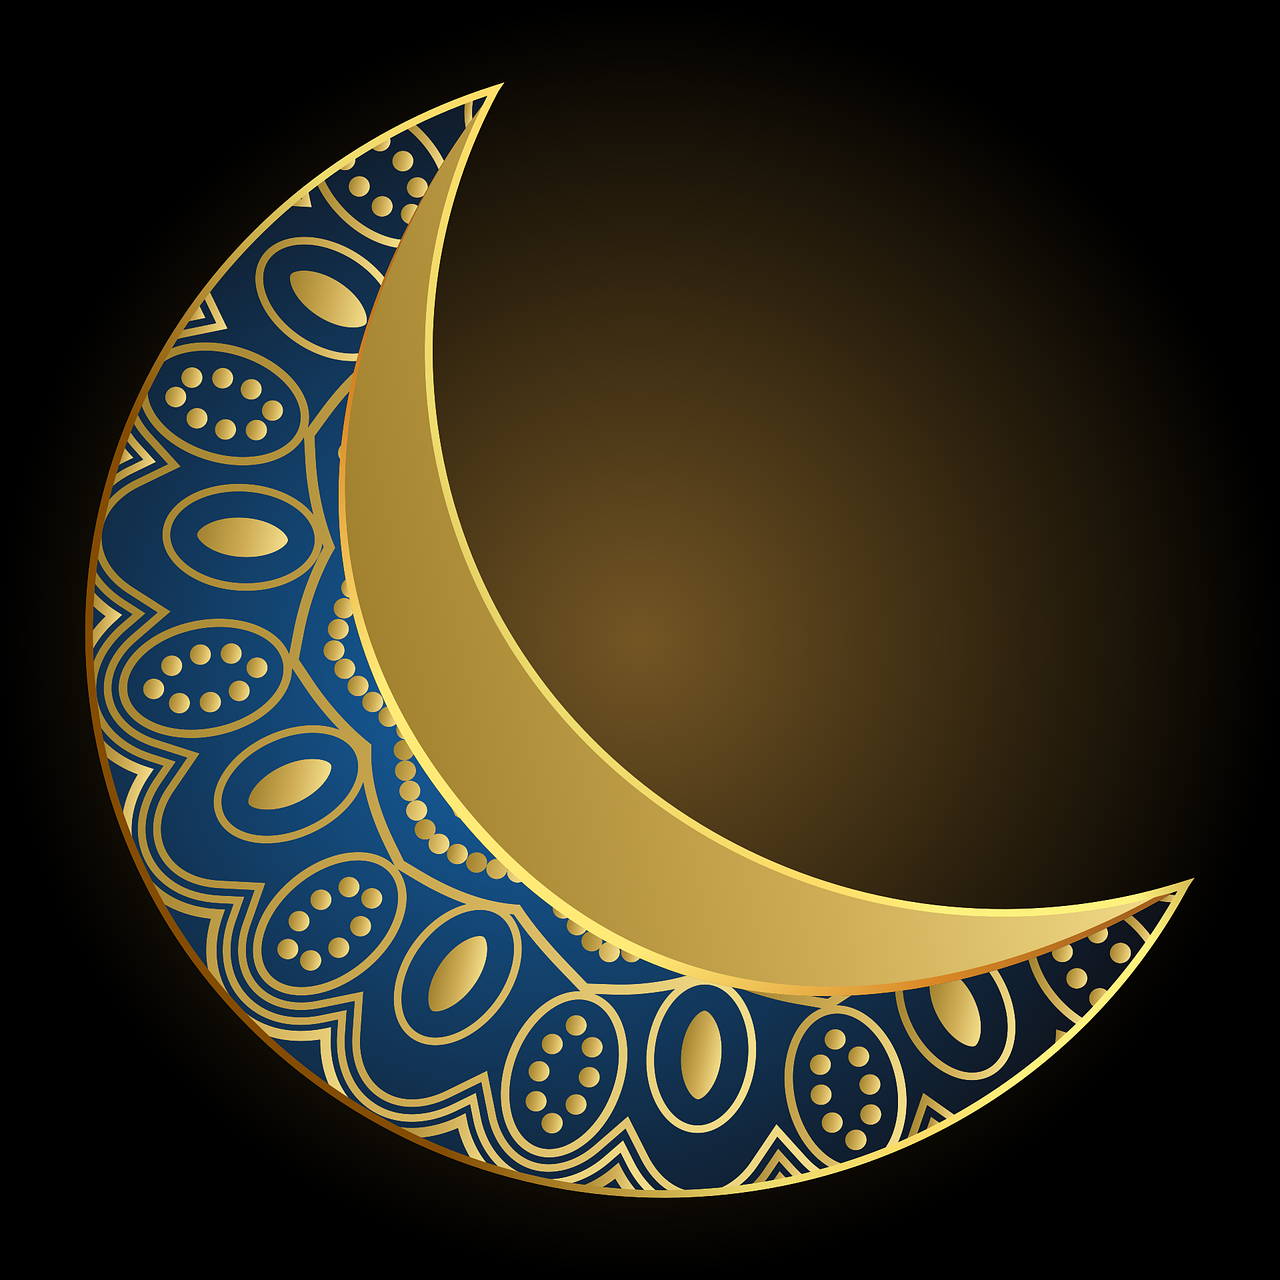 Crescent moon illustration with dark blue and gold design